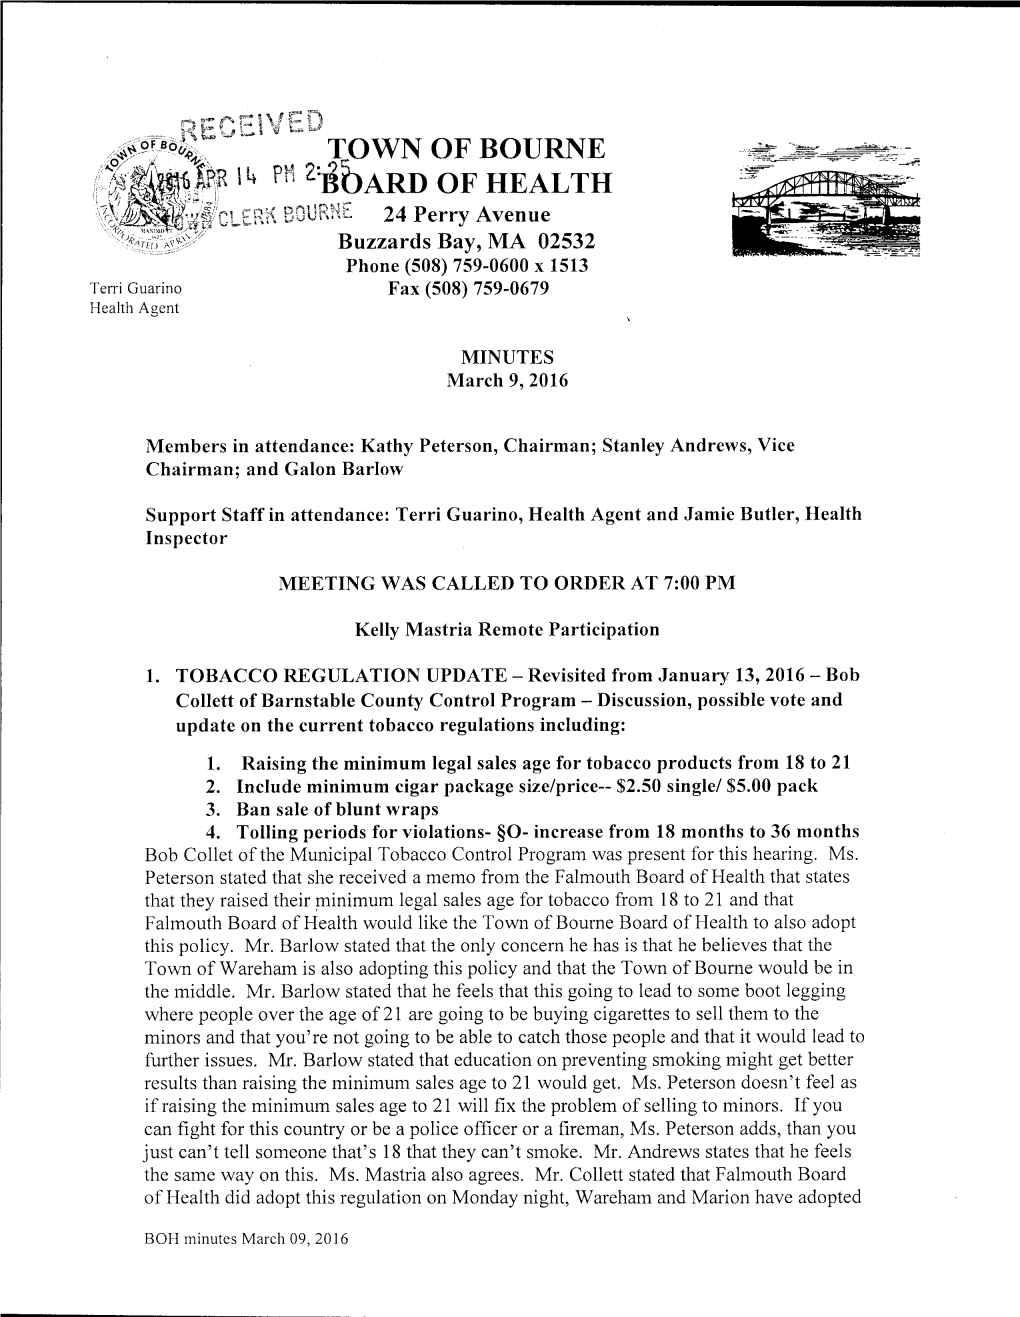 Board of Health Meeting Minutes March 9, 2016